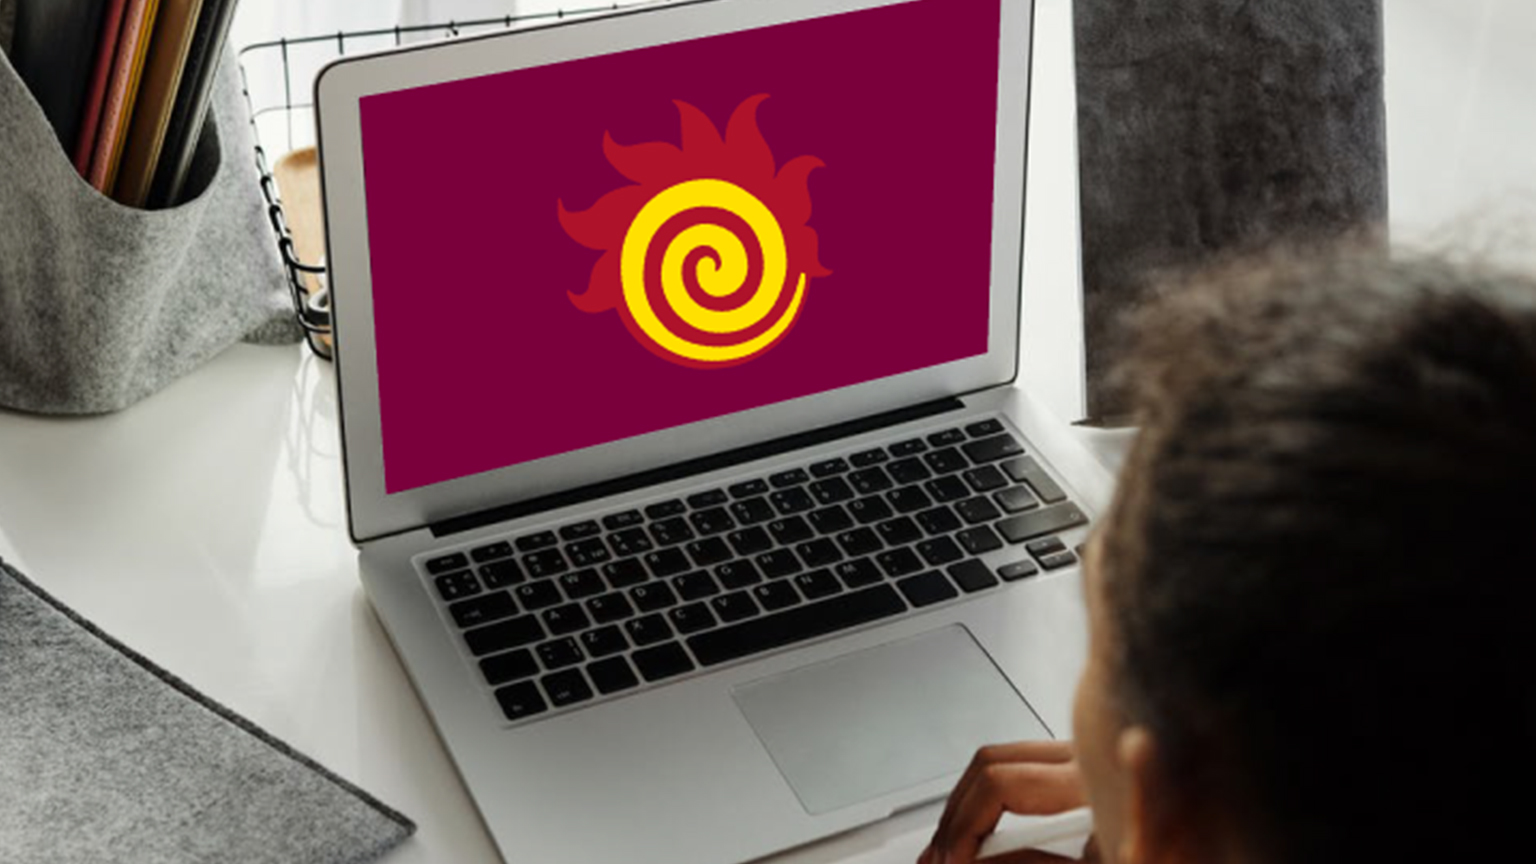 A fireball is on a laptop screen being used by a person